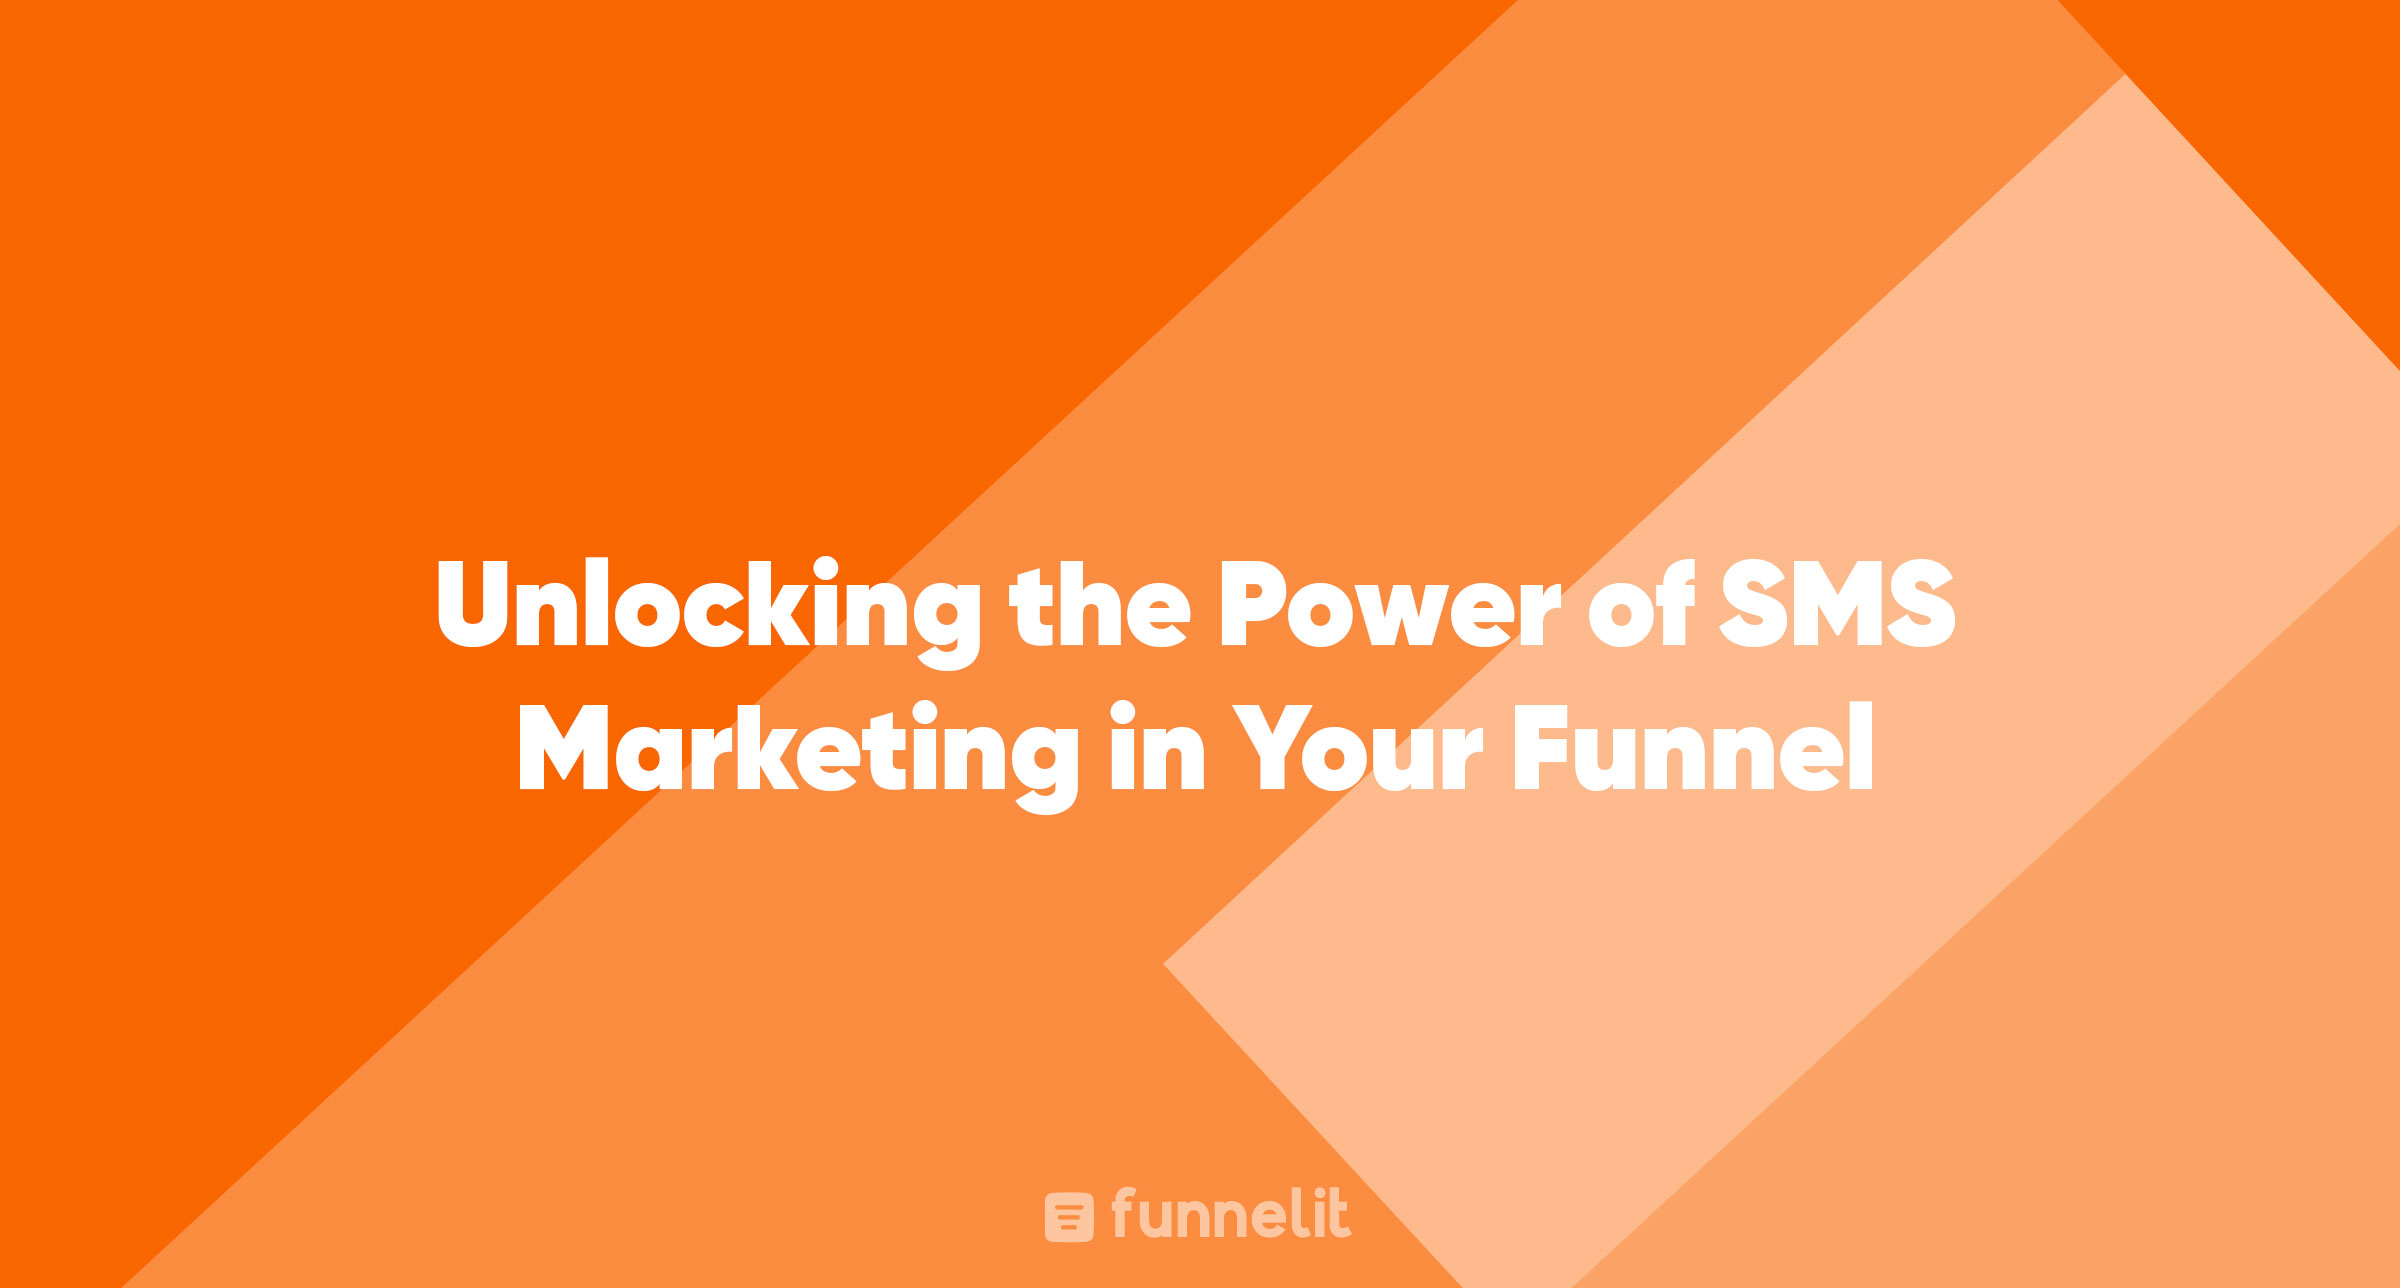 Article | Unlocking the Power of SMS Marketing in Your Funnel